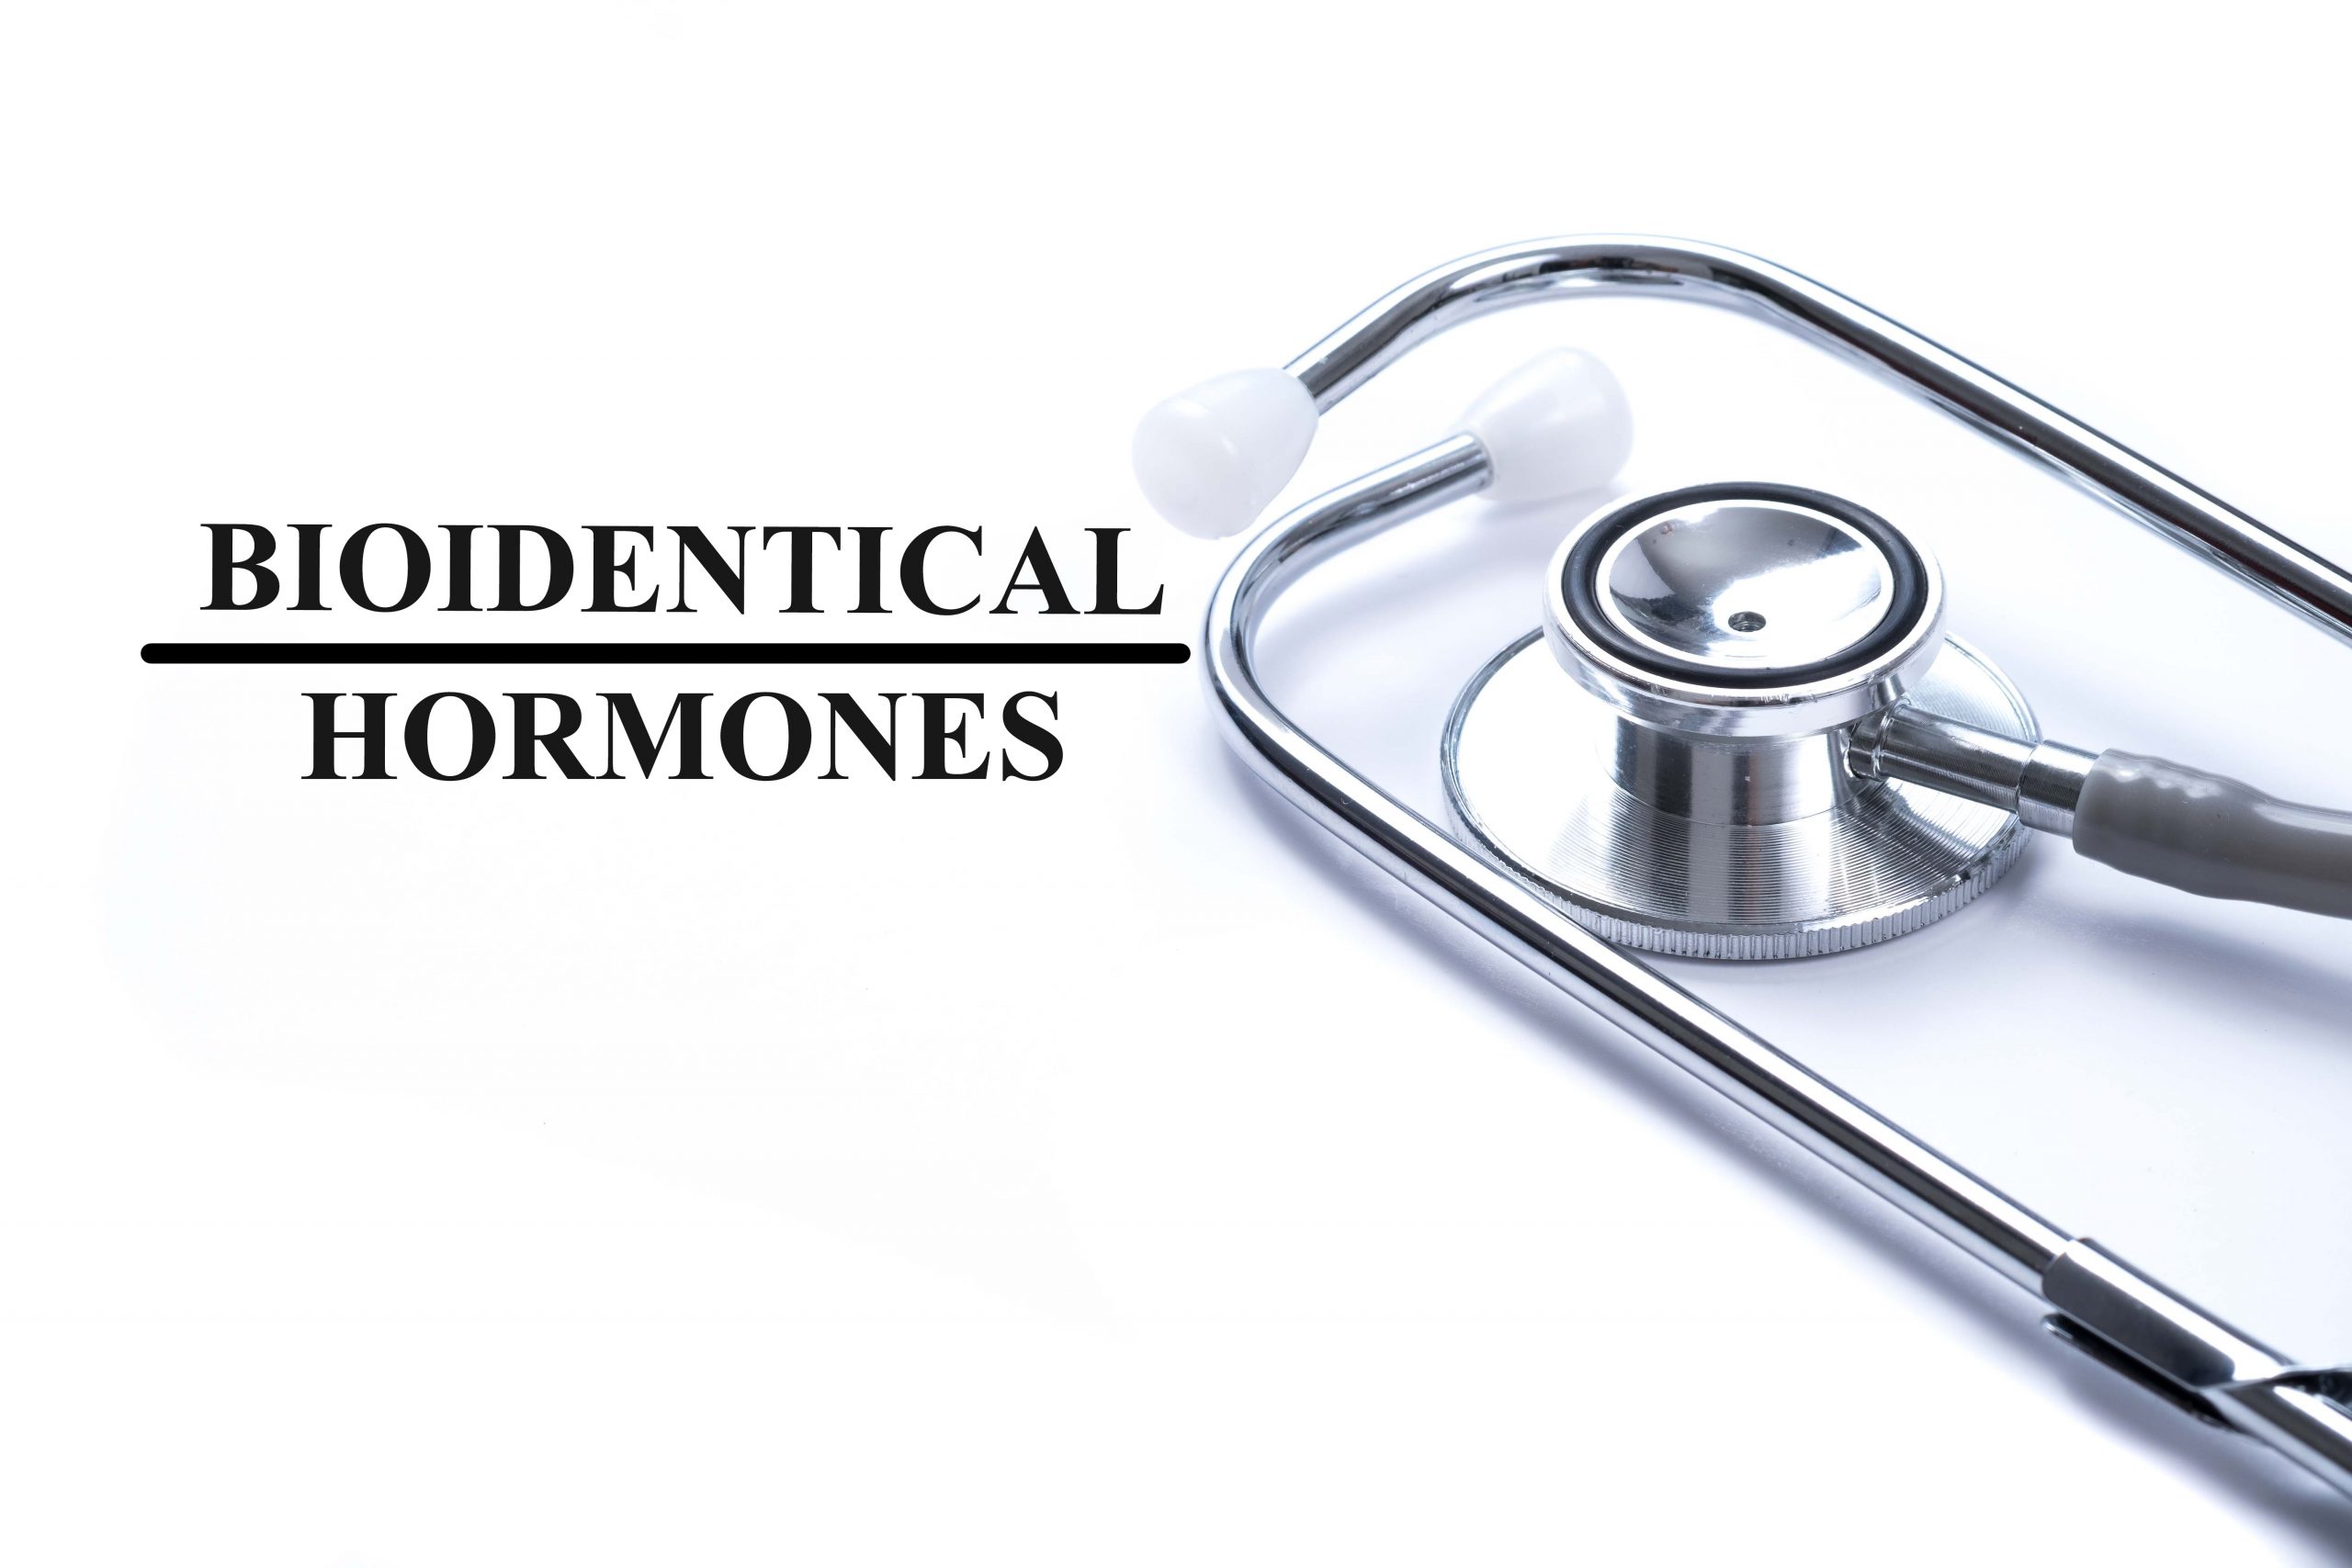 BIoidentical hormone therapy